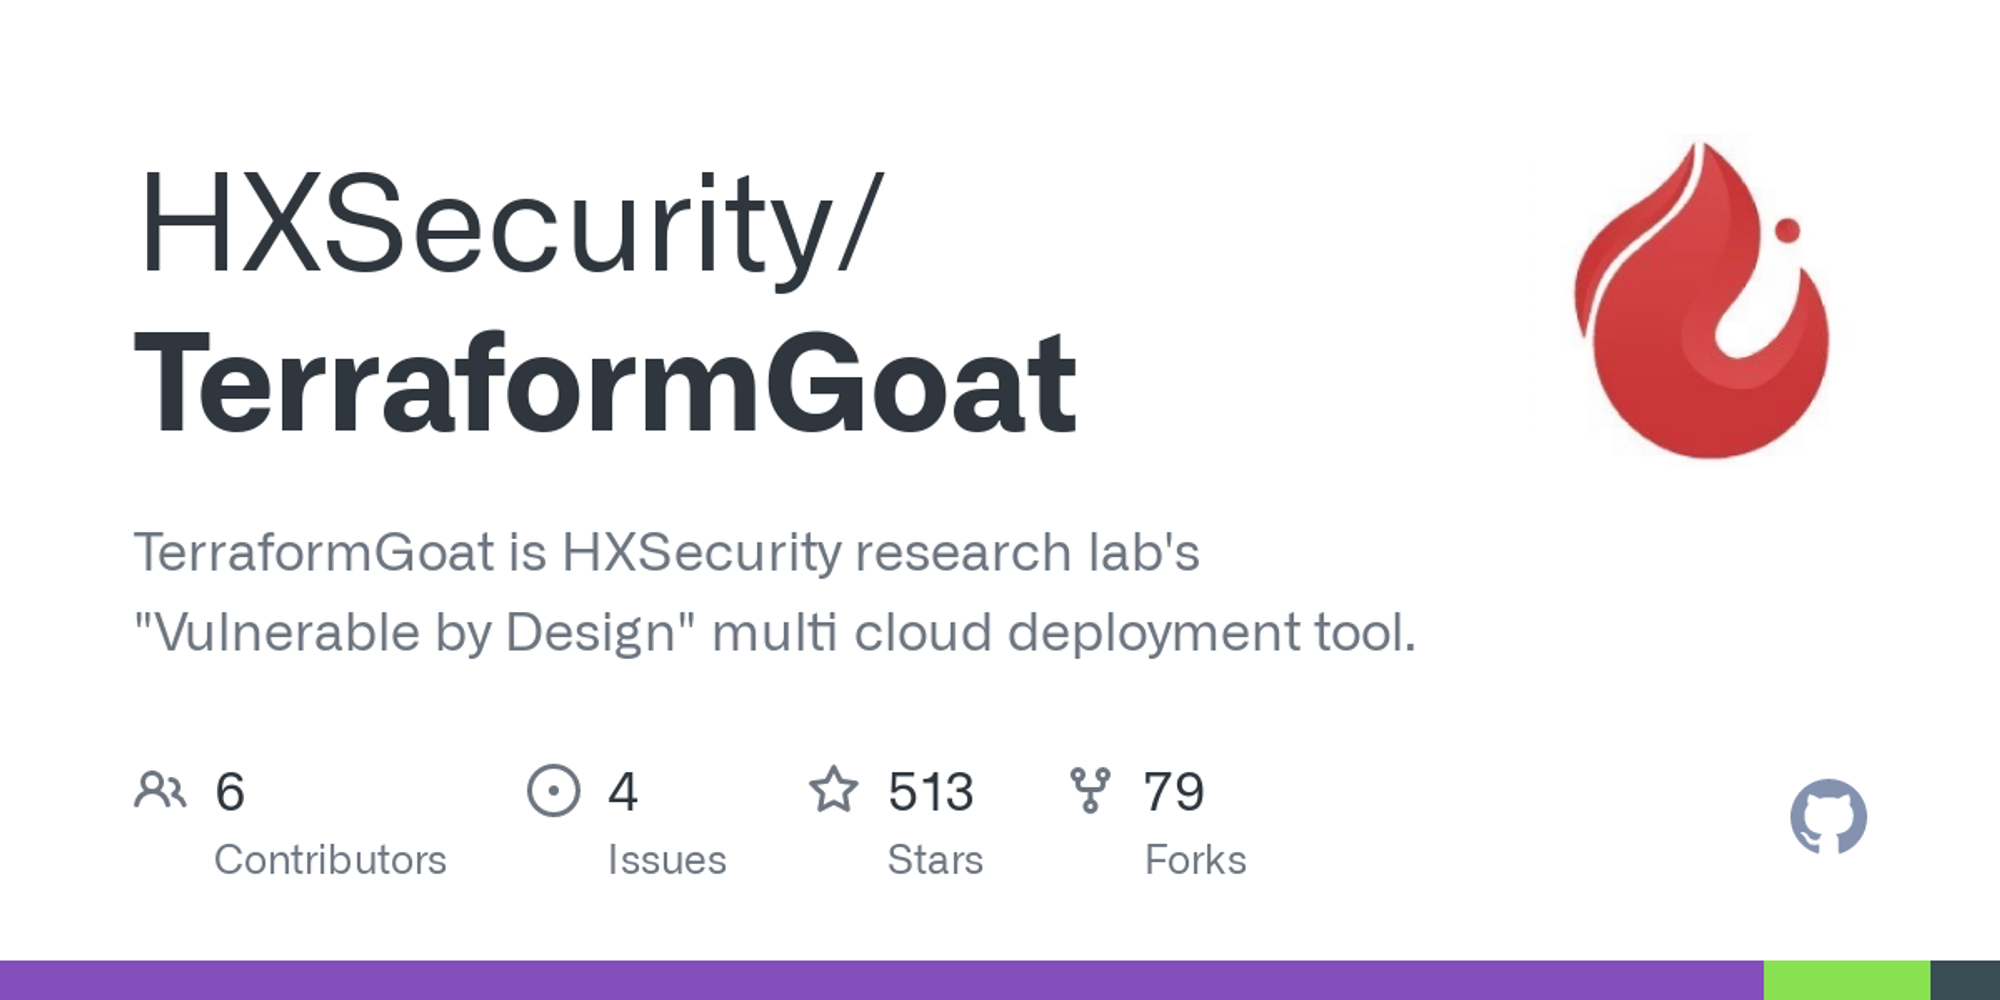 GitHub - HXSecurity/TerraformGoat: TerraformGoat is HXSecurity research lab's "Vulnerable by Design" multi cloud deployment tool.